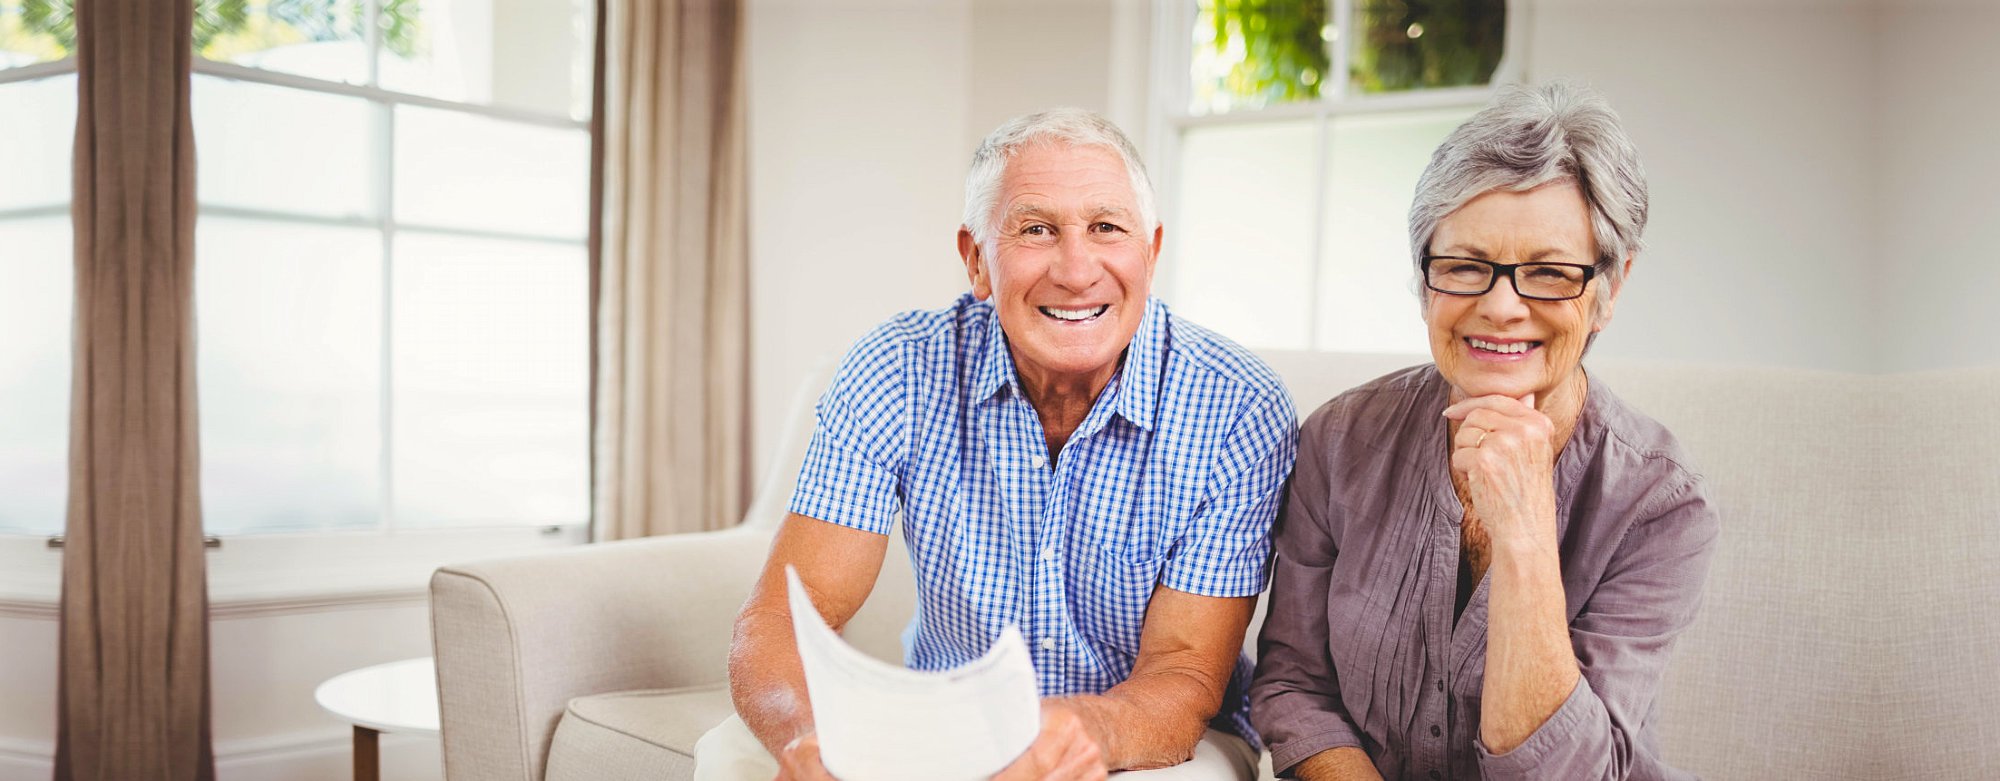 old couple showing their genuine smile